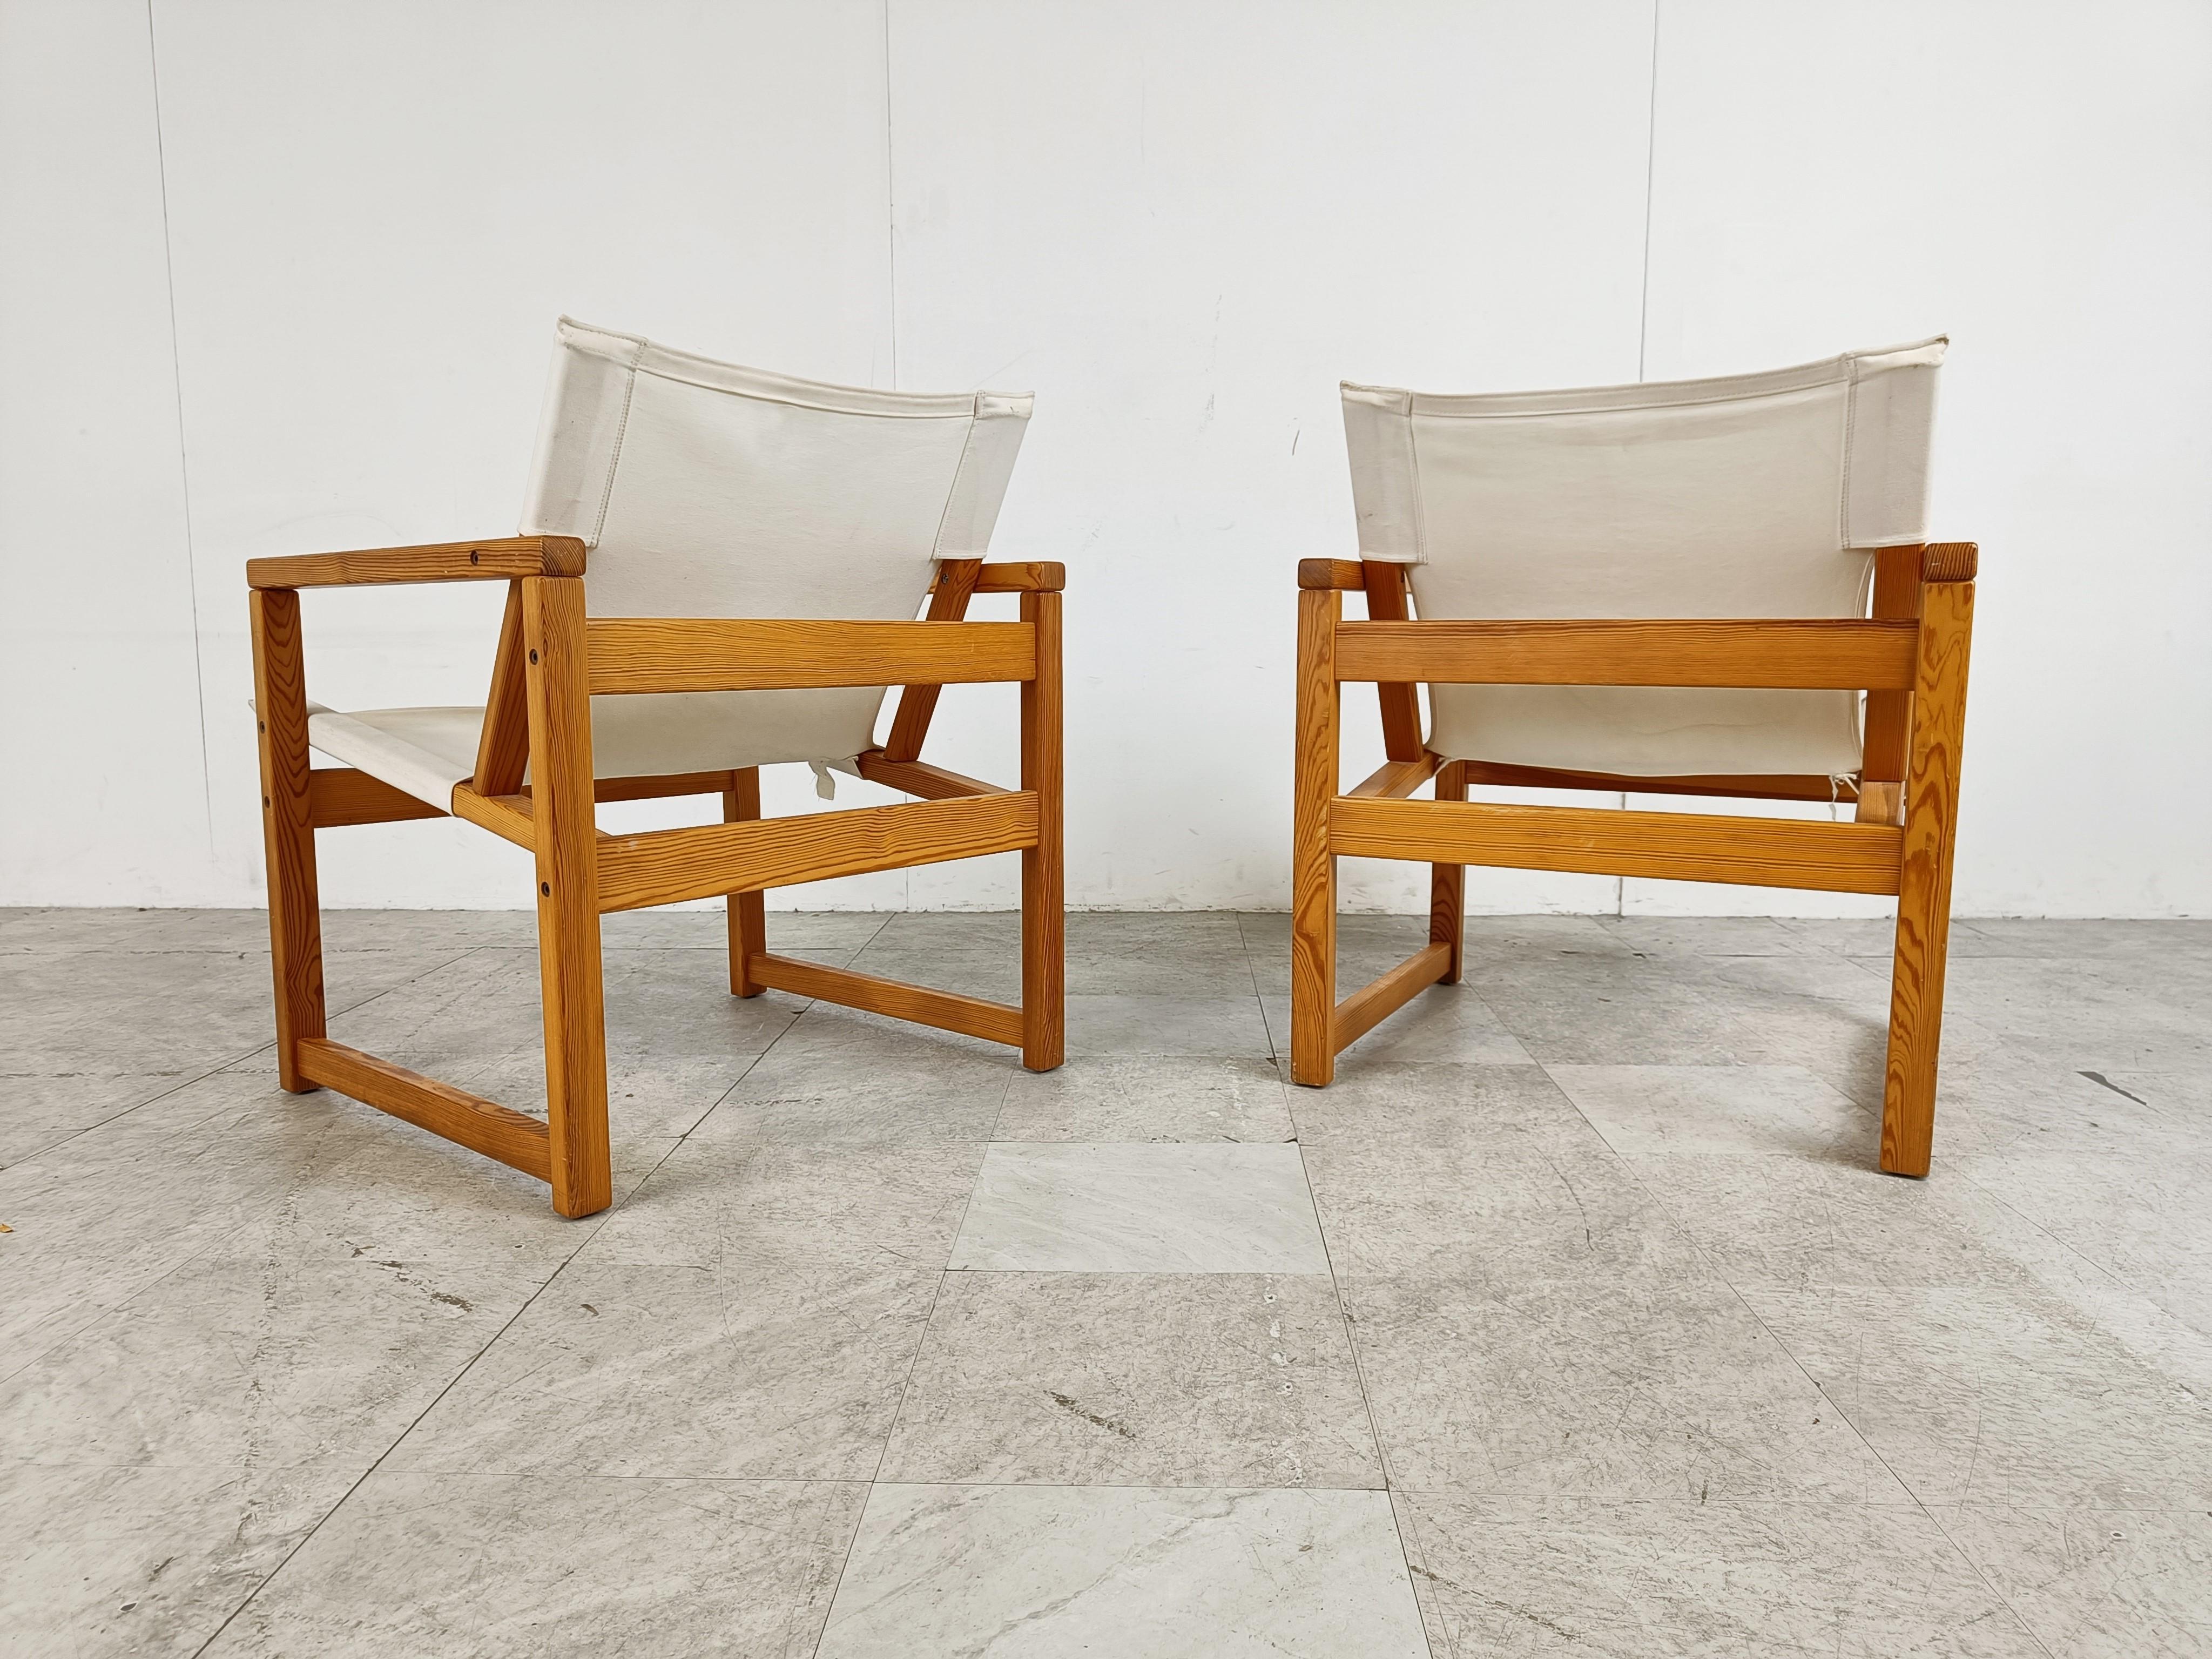 Vintage Safari Chairs by Tord Bjorlund for Ikea, 1980s 1